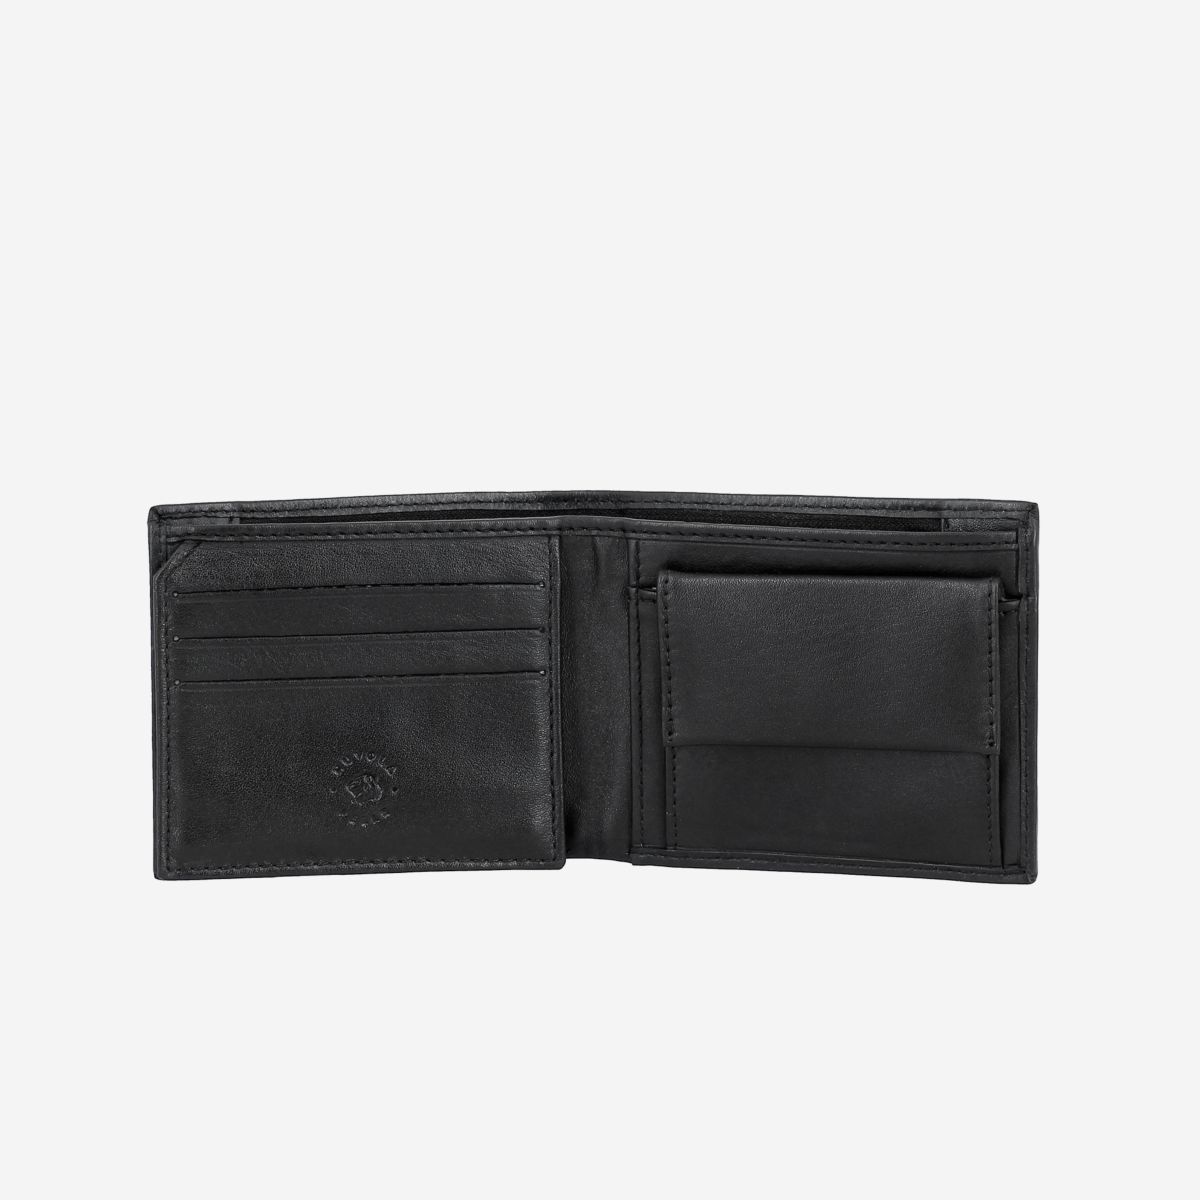 NUVOLA PELLE Small Wallet For Men With Coin Purse - Black